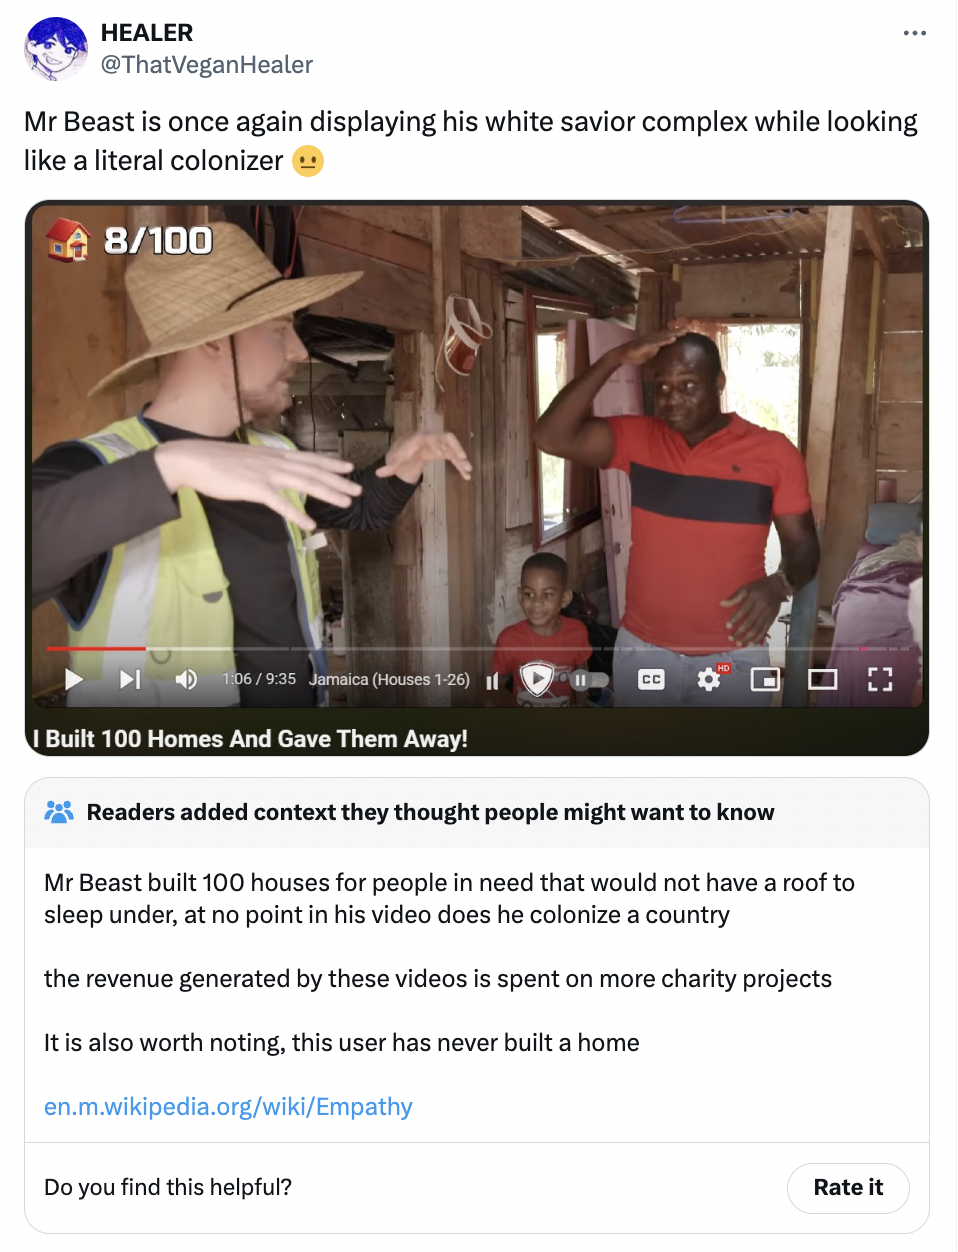 screenshot - Healer Mr Beast is once again displaying his white savior complex while looking a literal colonizer 8100 06 Jamaica Houses 126 Built 100 Homes And Gave Them Away! Readers added context they thought people might want to know Mr Beast built 100